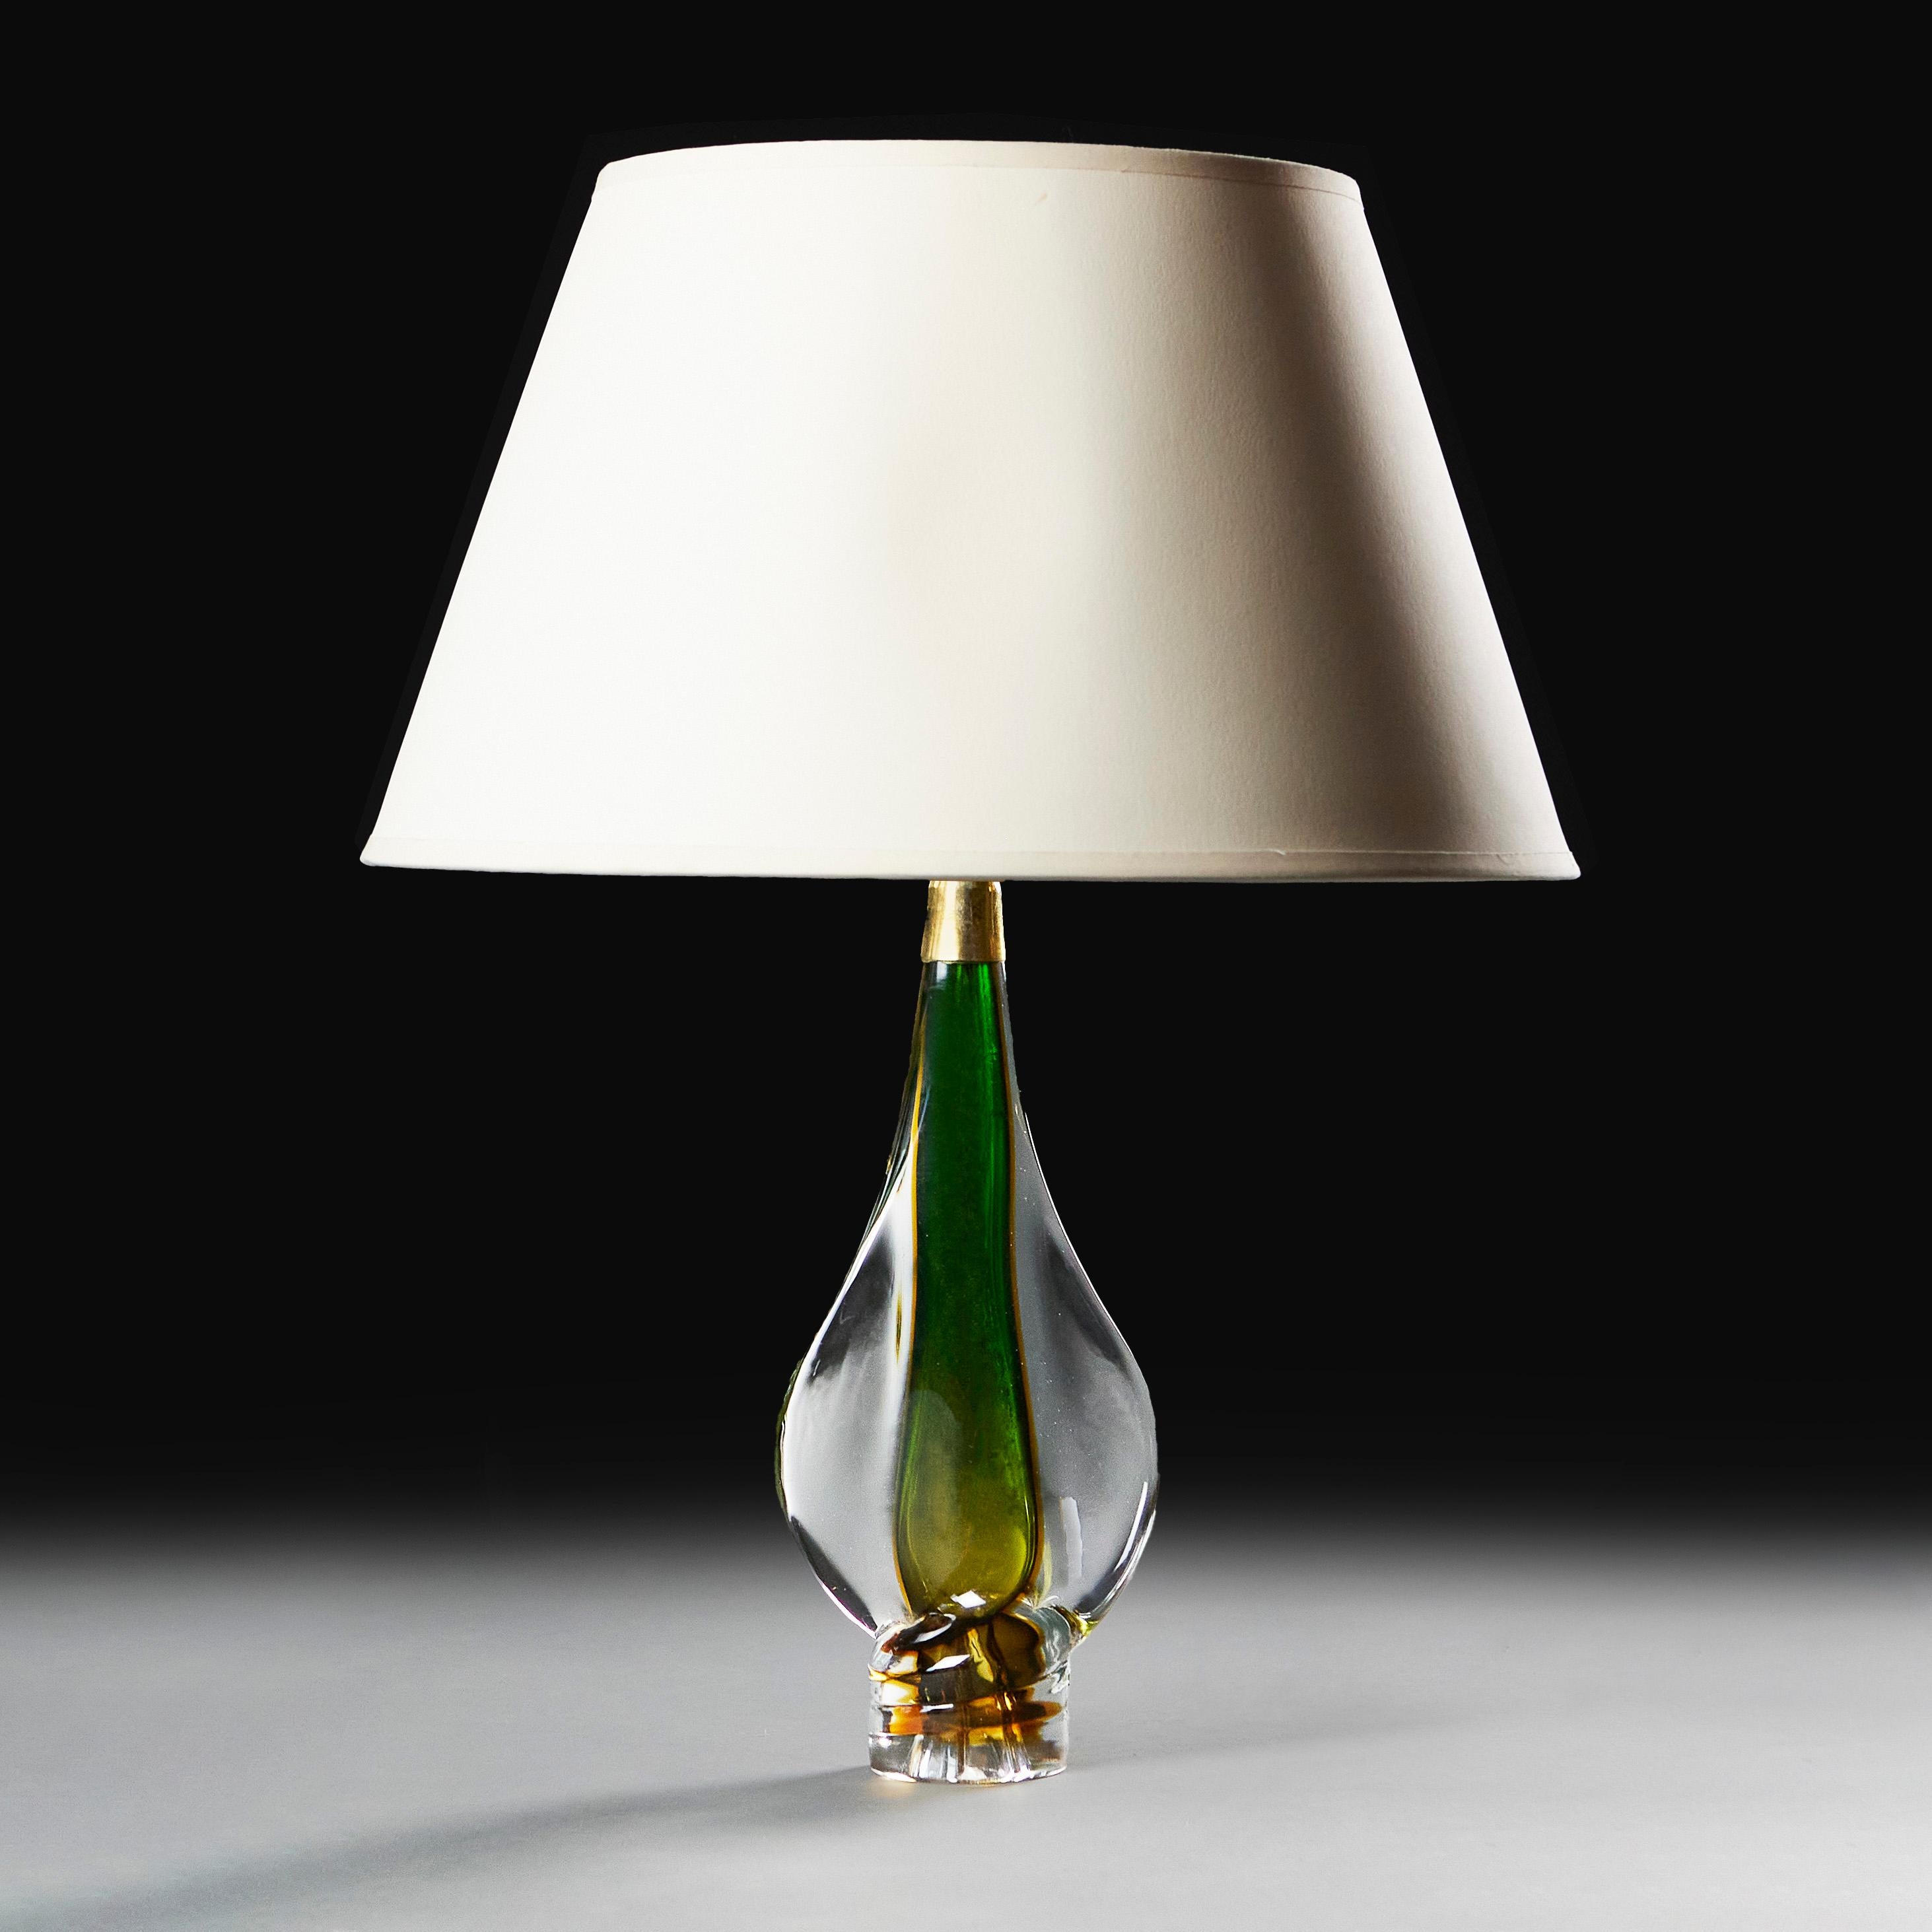 Italy, circa 1940

A Murano glass lamp with green centre, made using the Sommerso technique typical of Murano, with teardrop form body and brass neck.

Height of lamp     36.00cm
Height with shade   61.00cm
Width of body   15.00cm
Diameter of base  